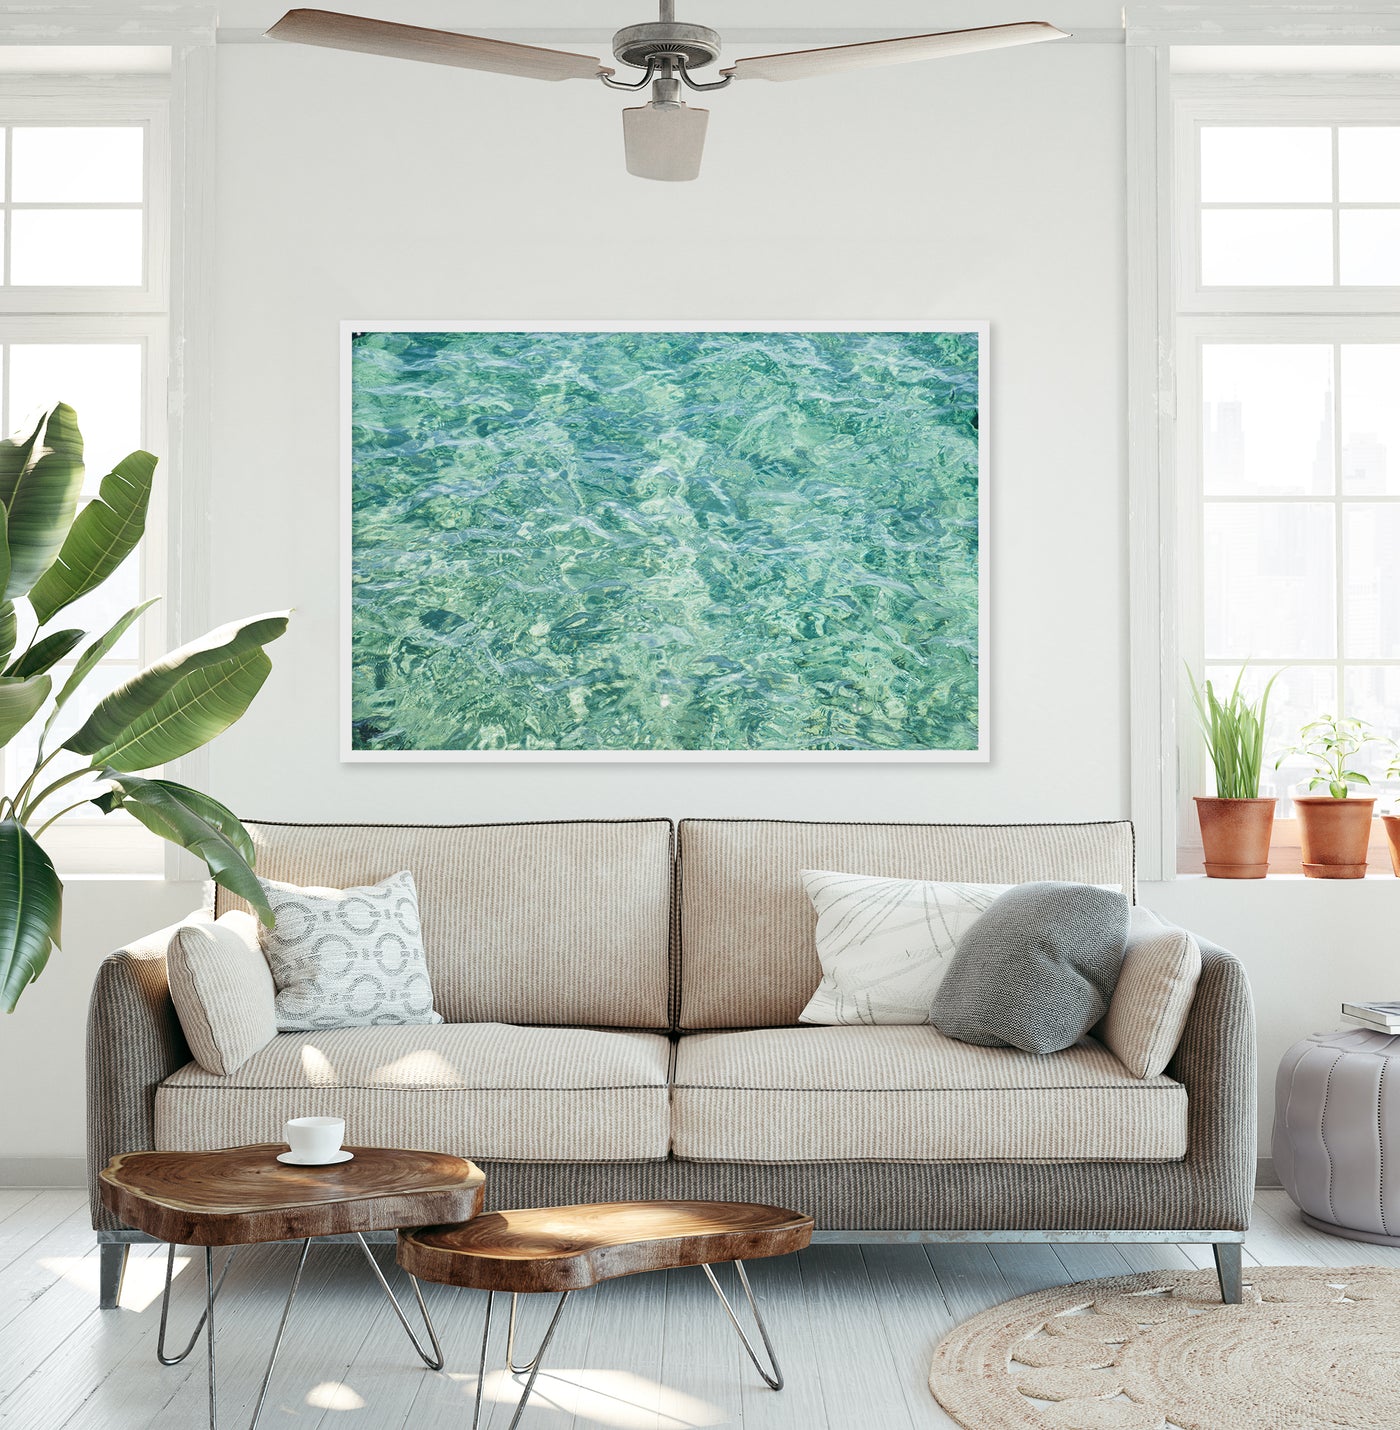 Oversized abstract wall art by Cattie Coyle Photography above couch in living room